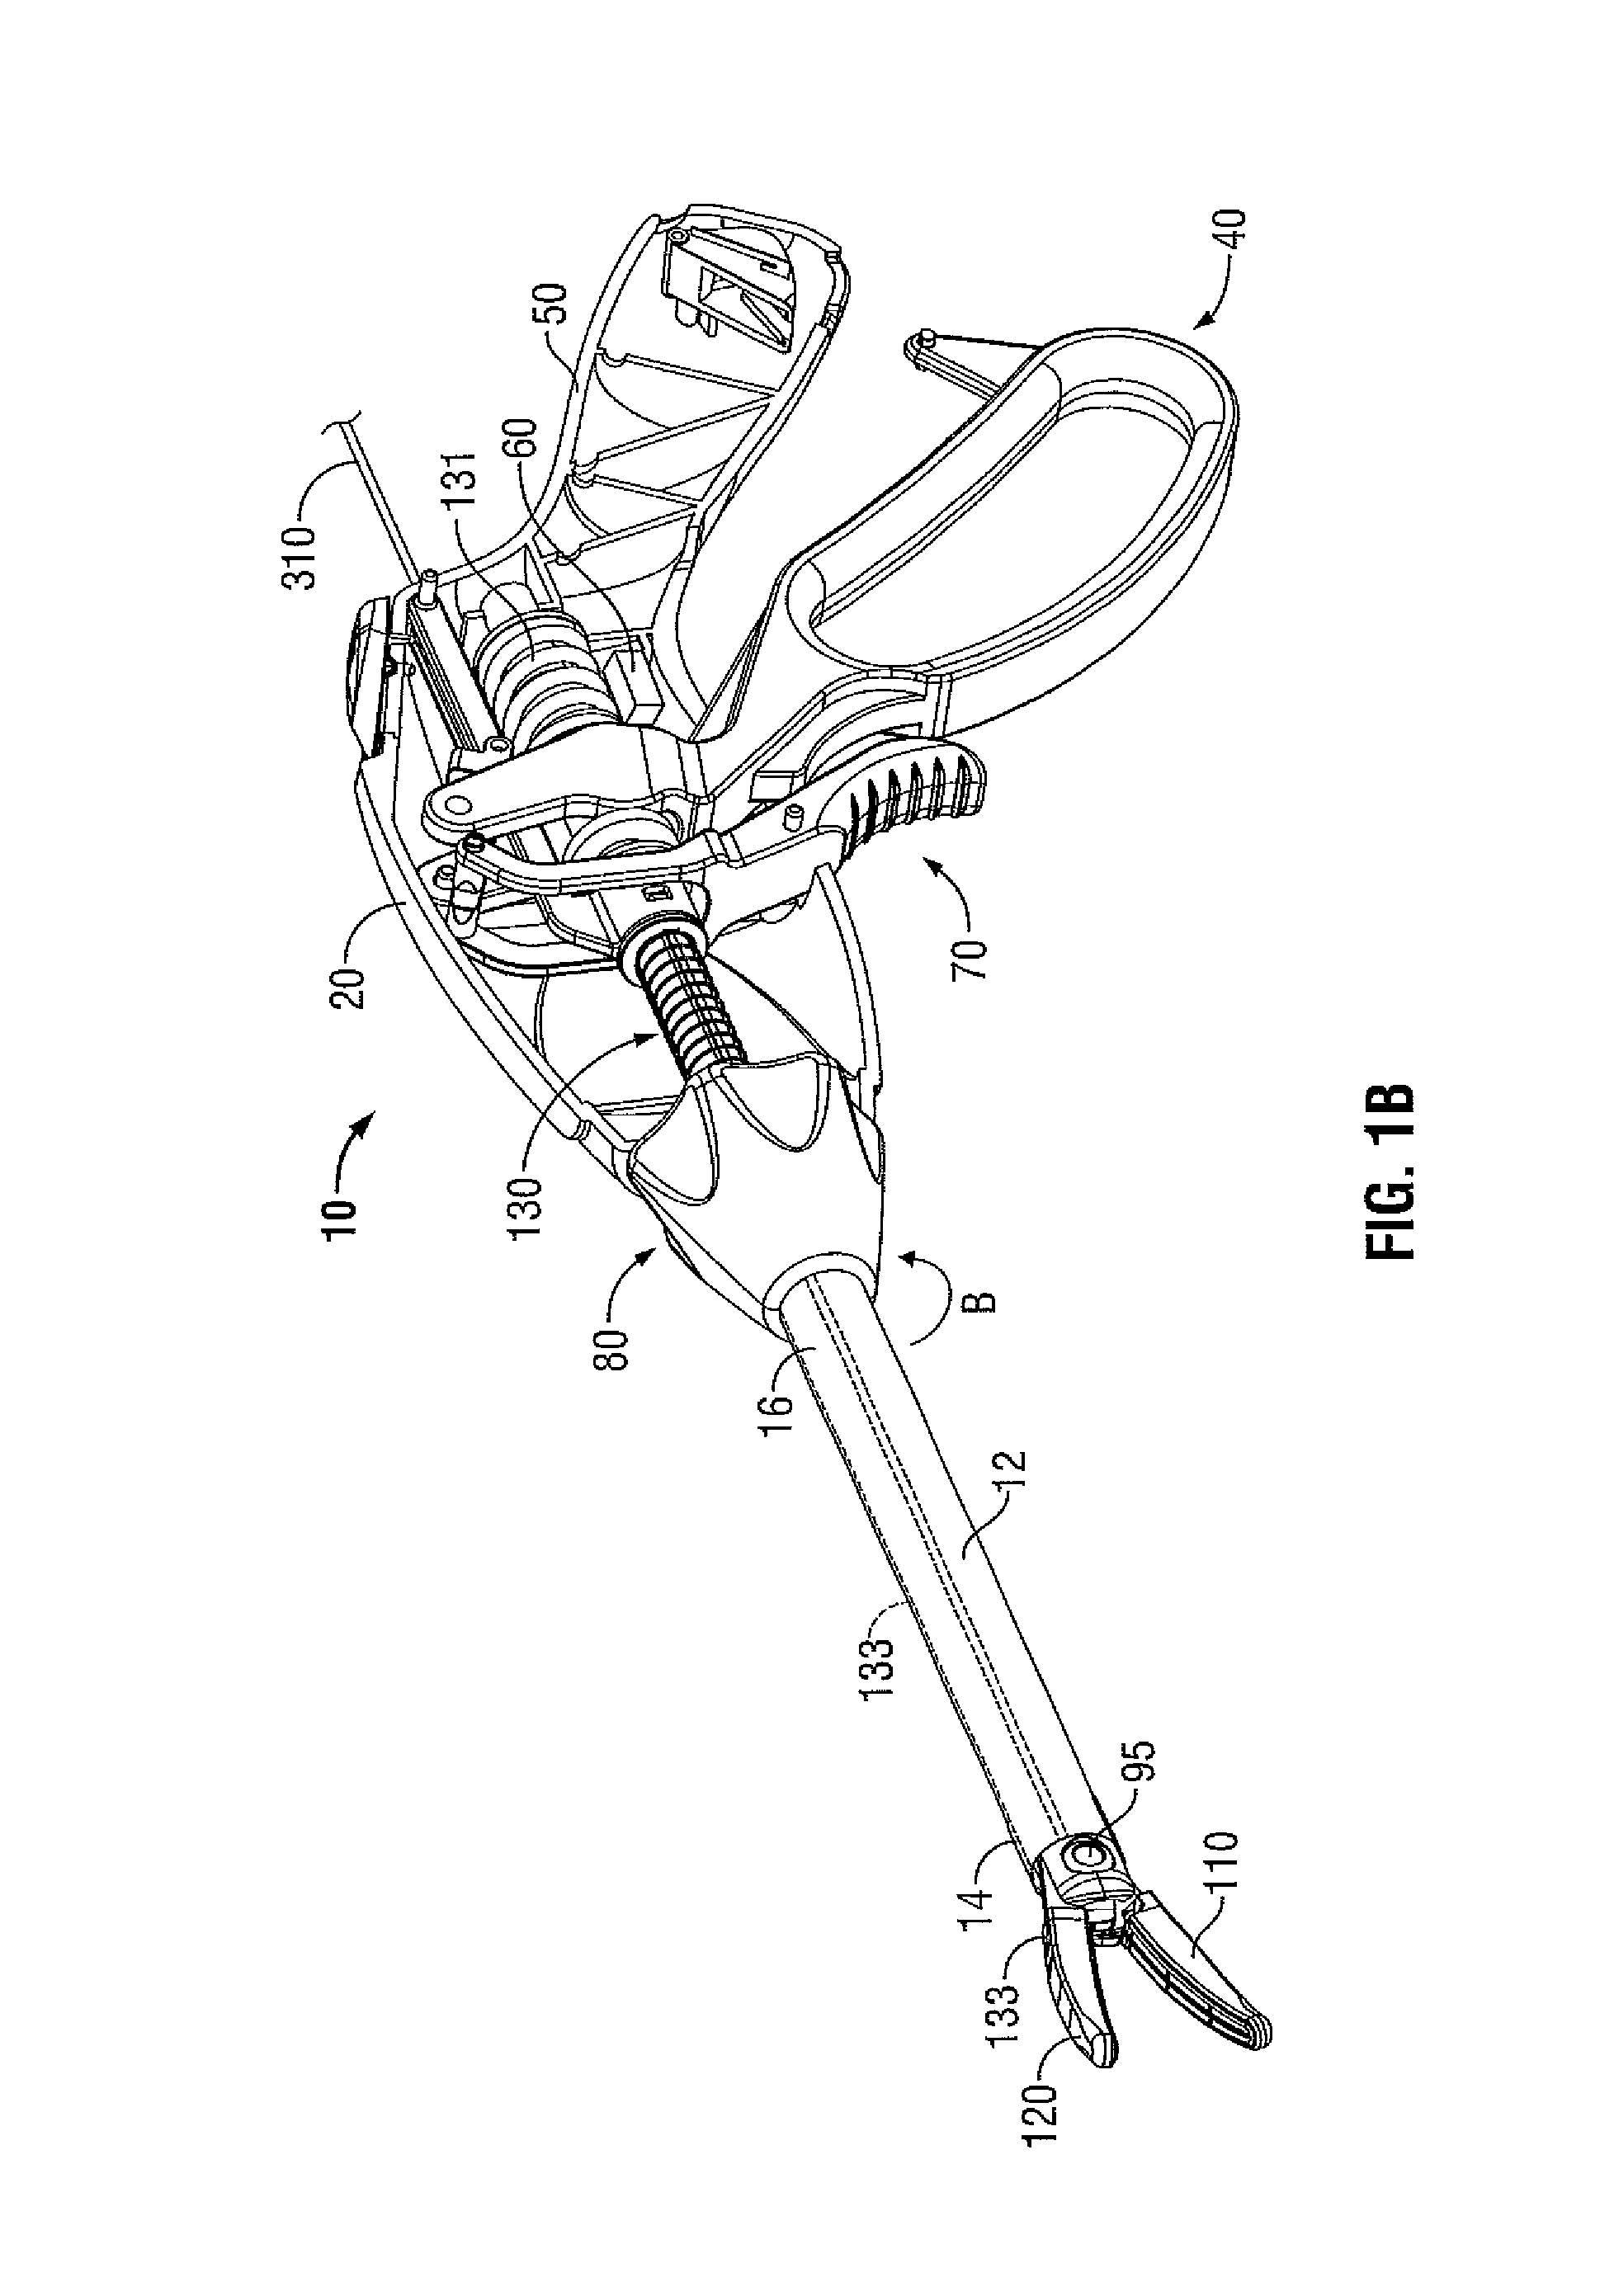 Apparatus and method for using augmented reality vision system in surgical procedures